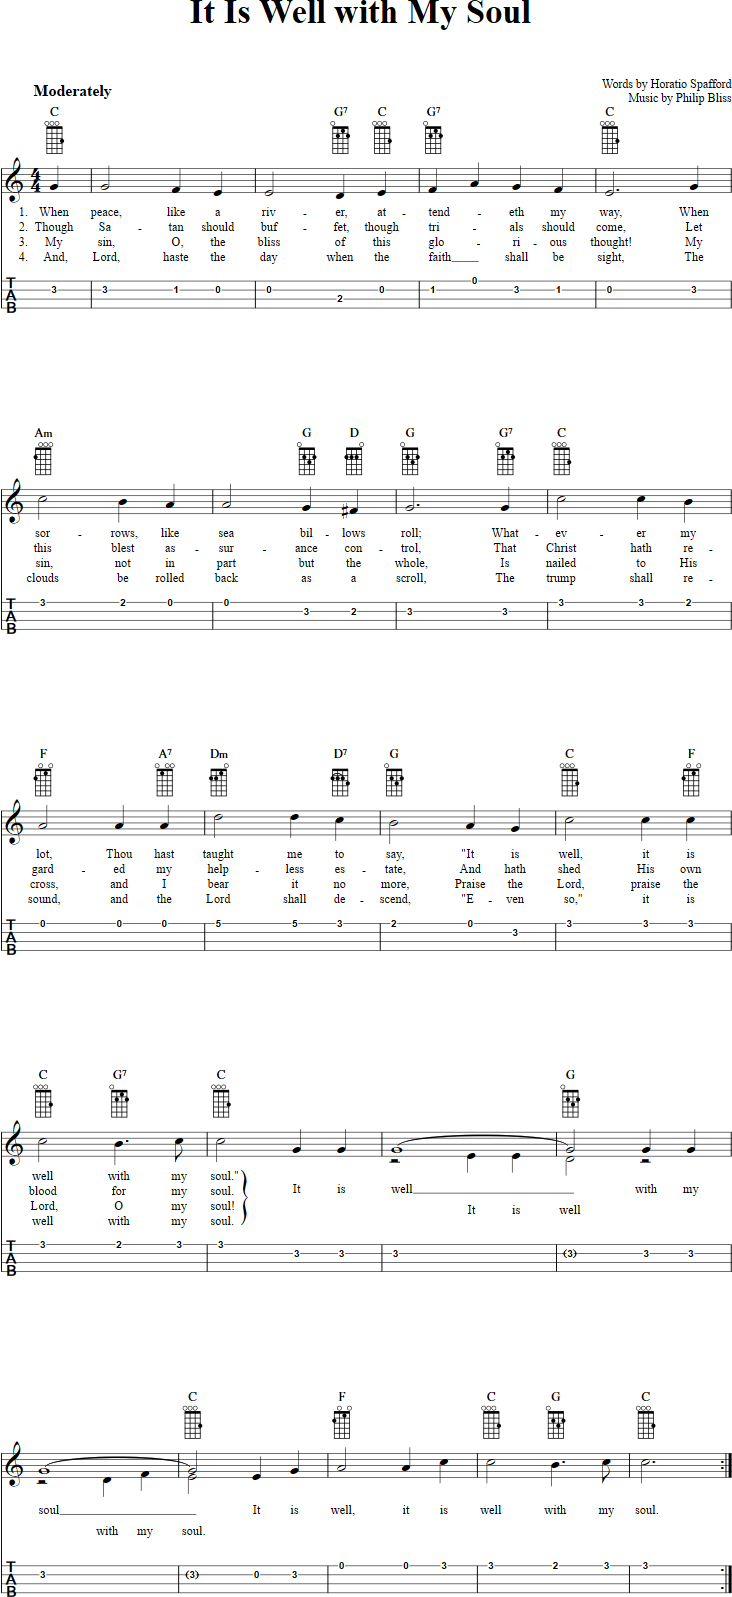 It Is Well Chords It Is Well With My Soul Chords Sheet Music And Tab For Ukulele